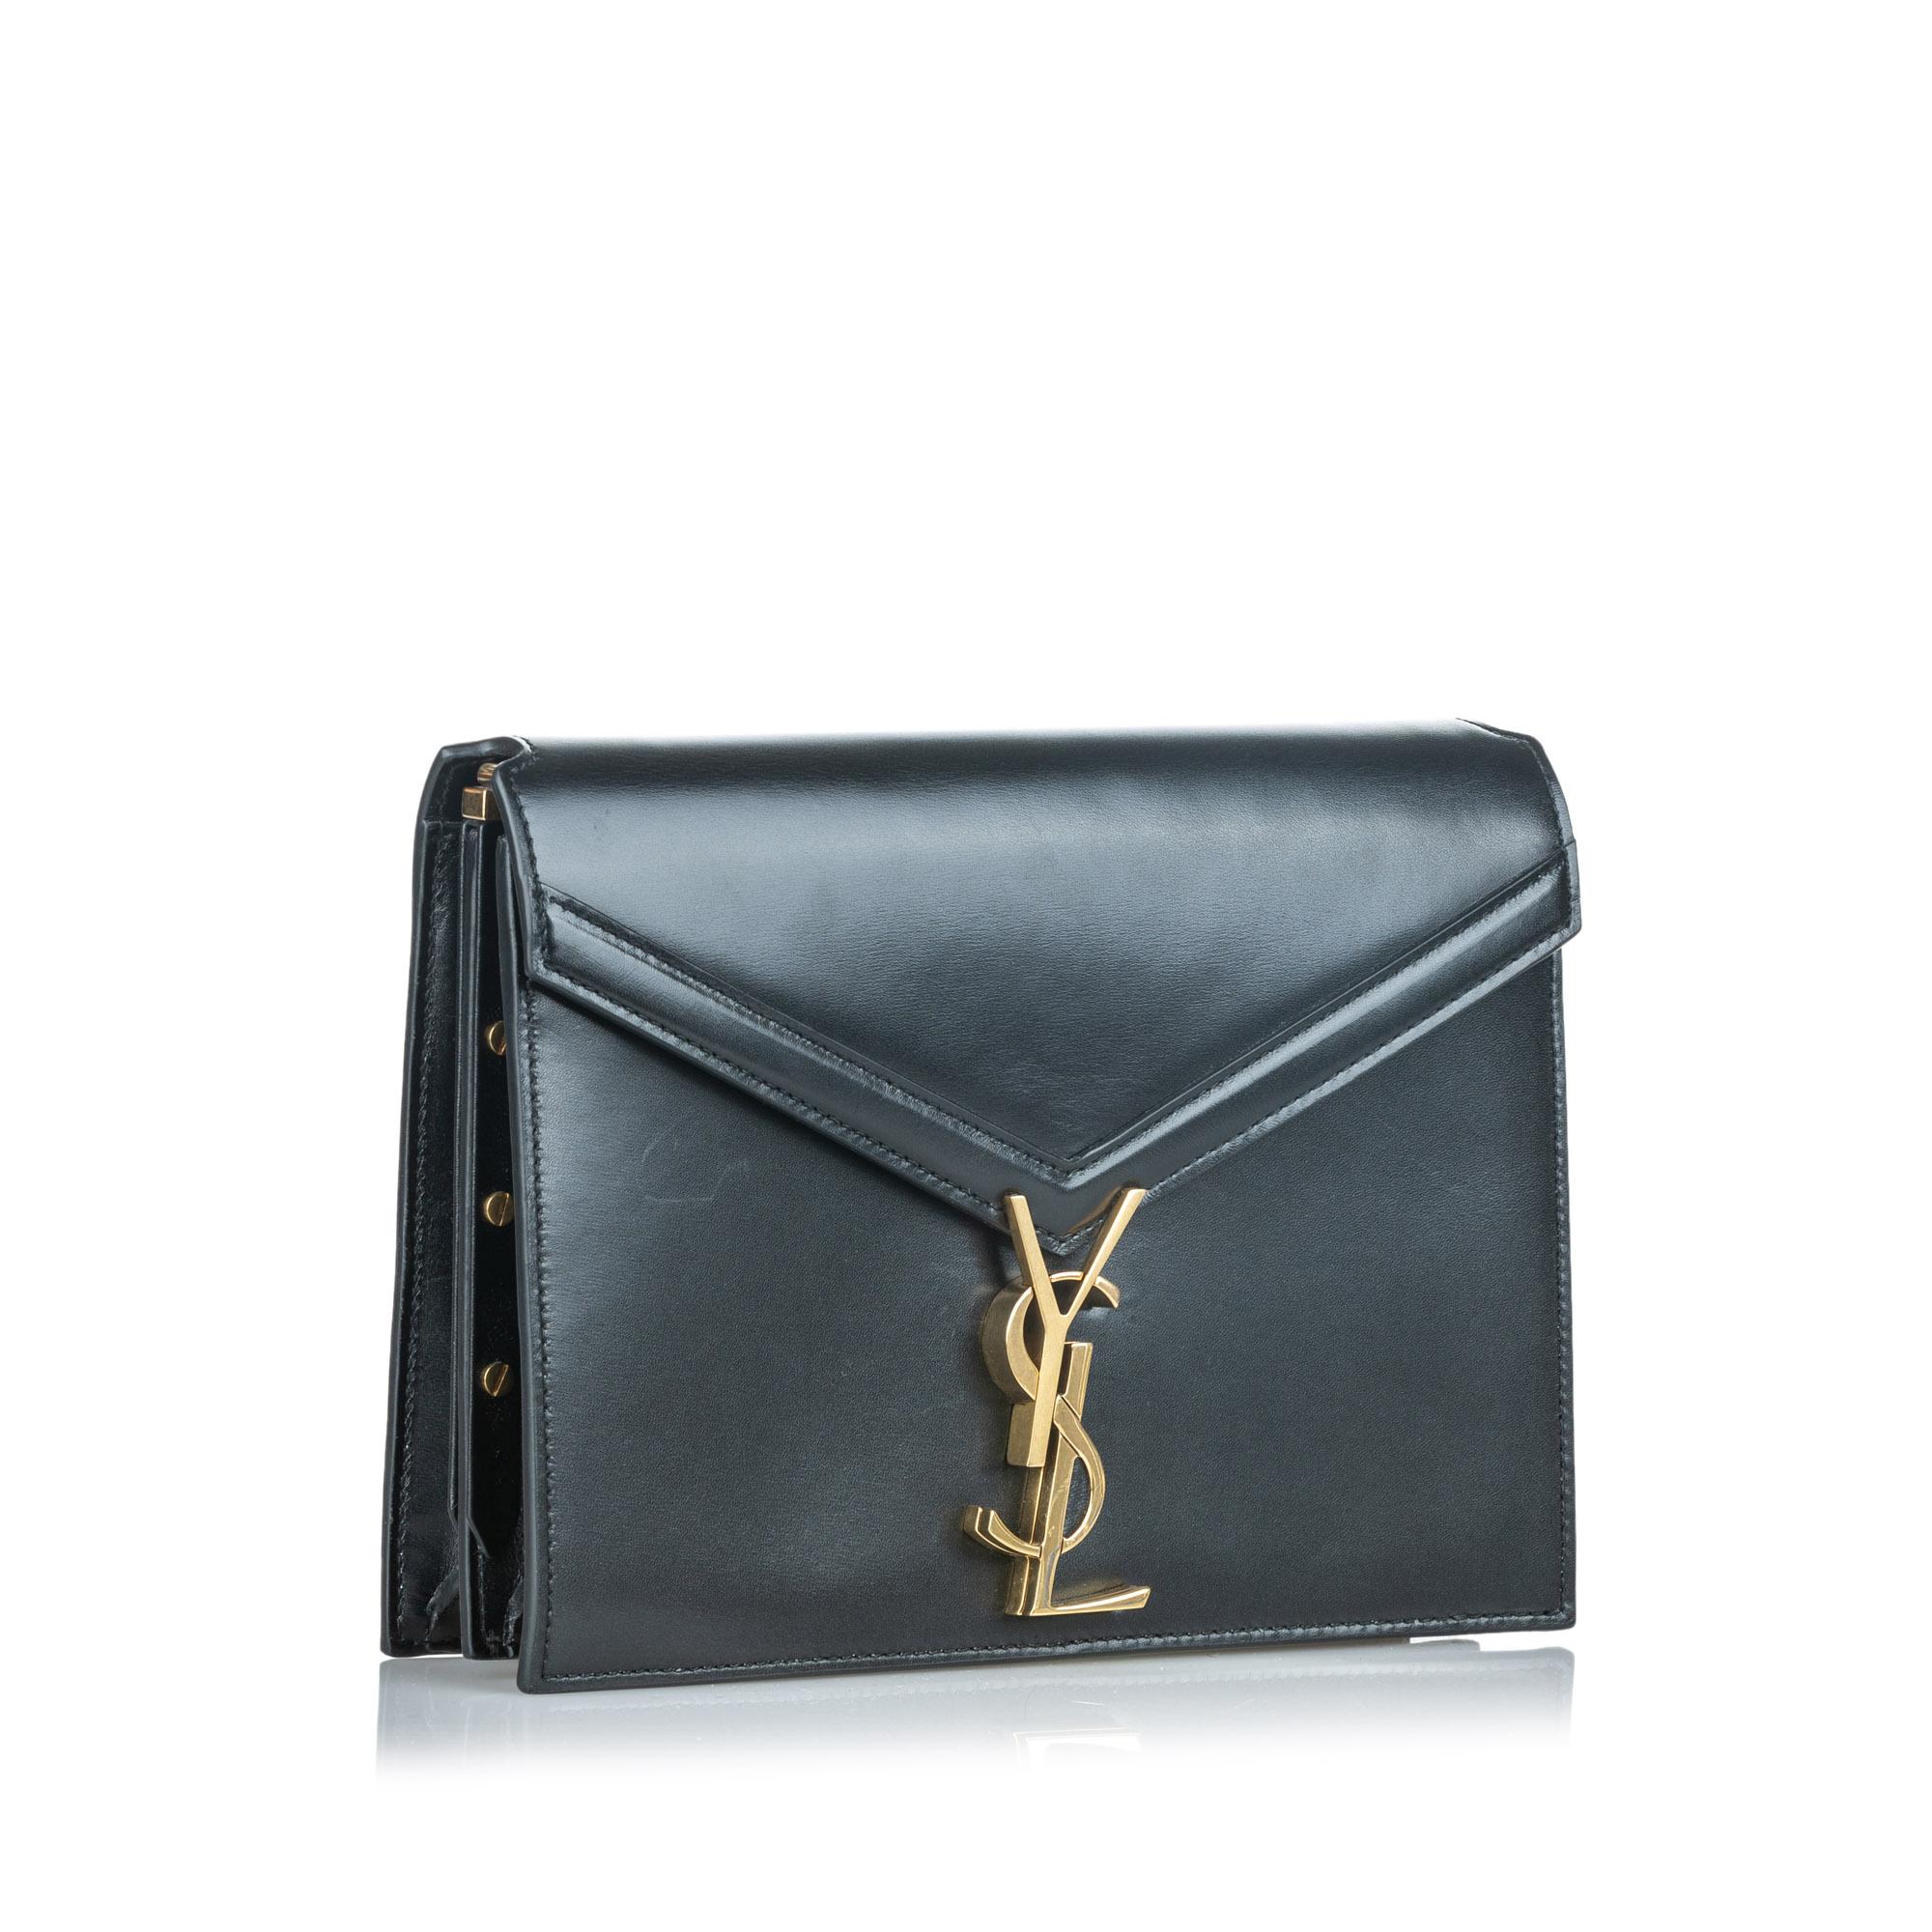 The Marceau Logo features a calf leather body, a gold toned chain strap, a top flap with clasp closure and interior zip and slip pockets. It carries as B+ condition rating.

Inclusions: 
Dust Bag
Authenticity Card

Dimensions:
Length: 16.00